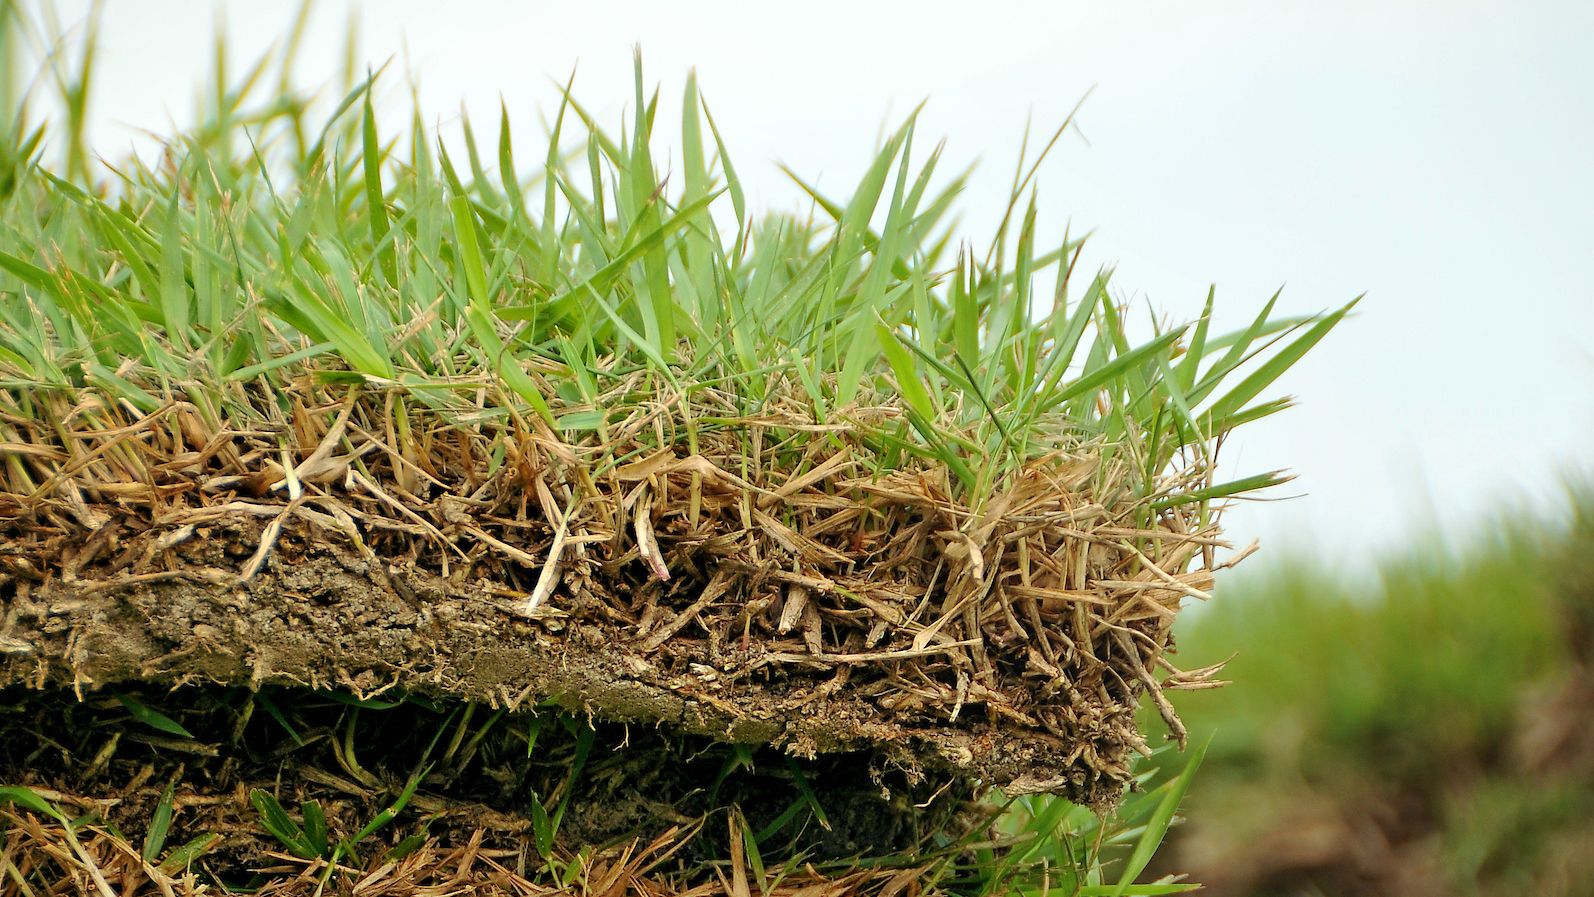 Close-up cross section of piled up sod.